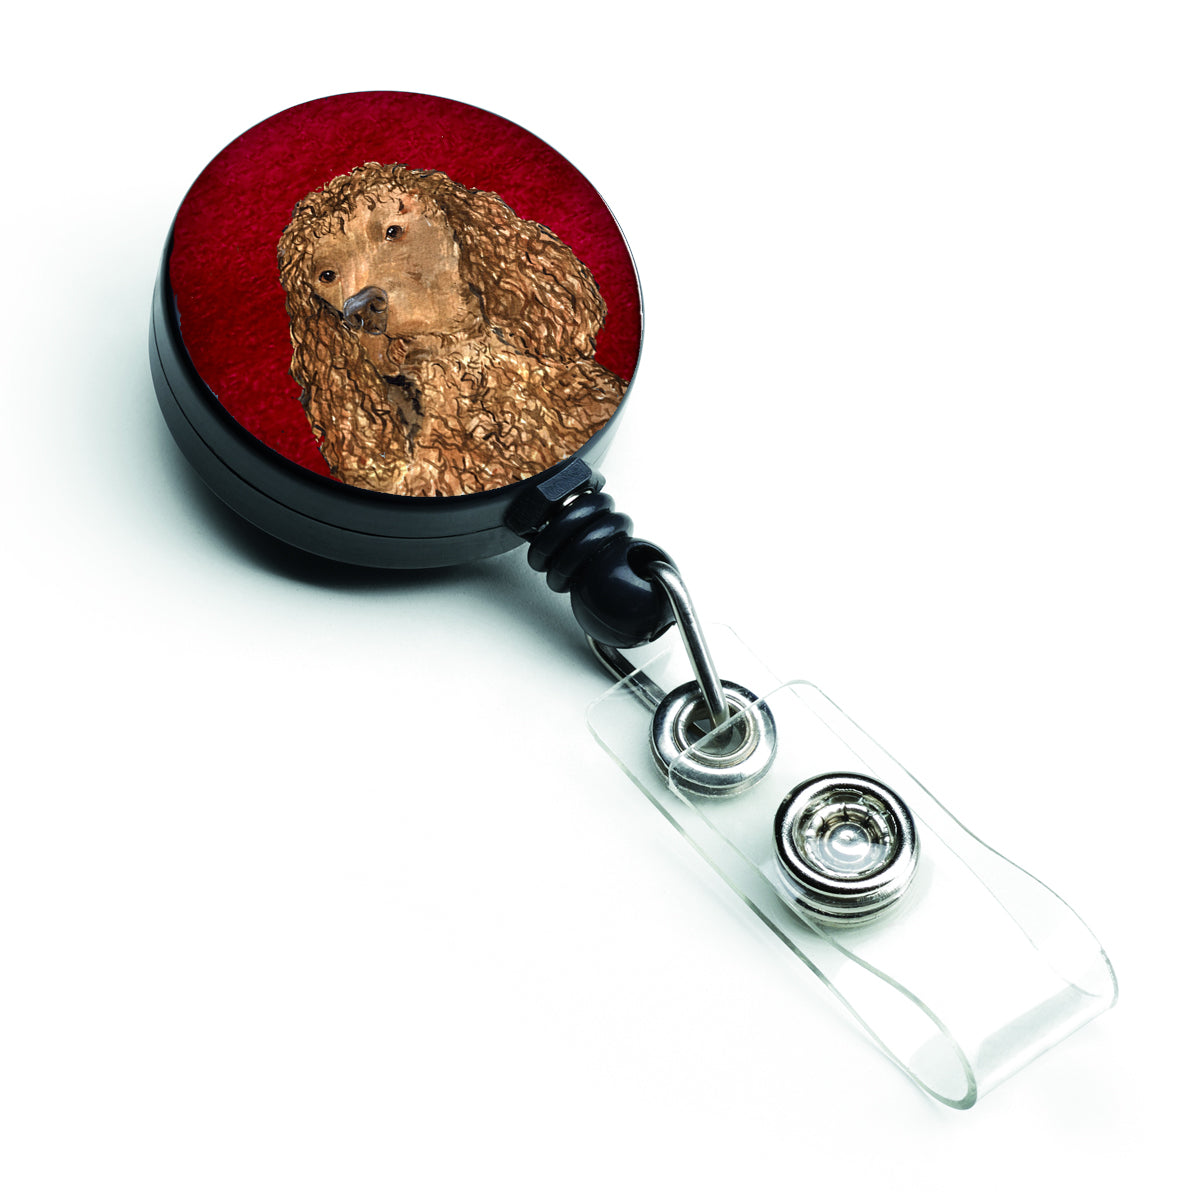 American Water Spaniel Retractable Badge Reel or ID Holder with Clip